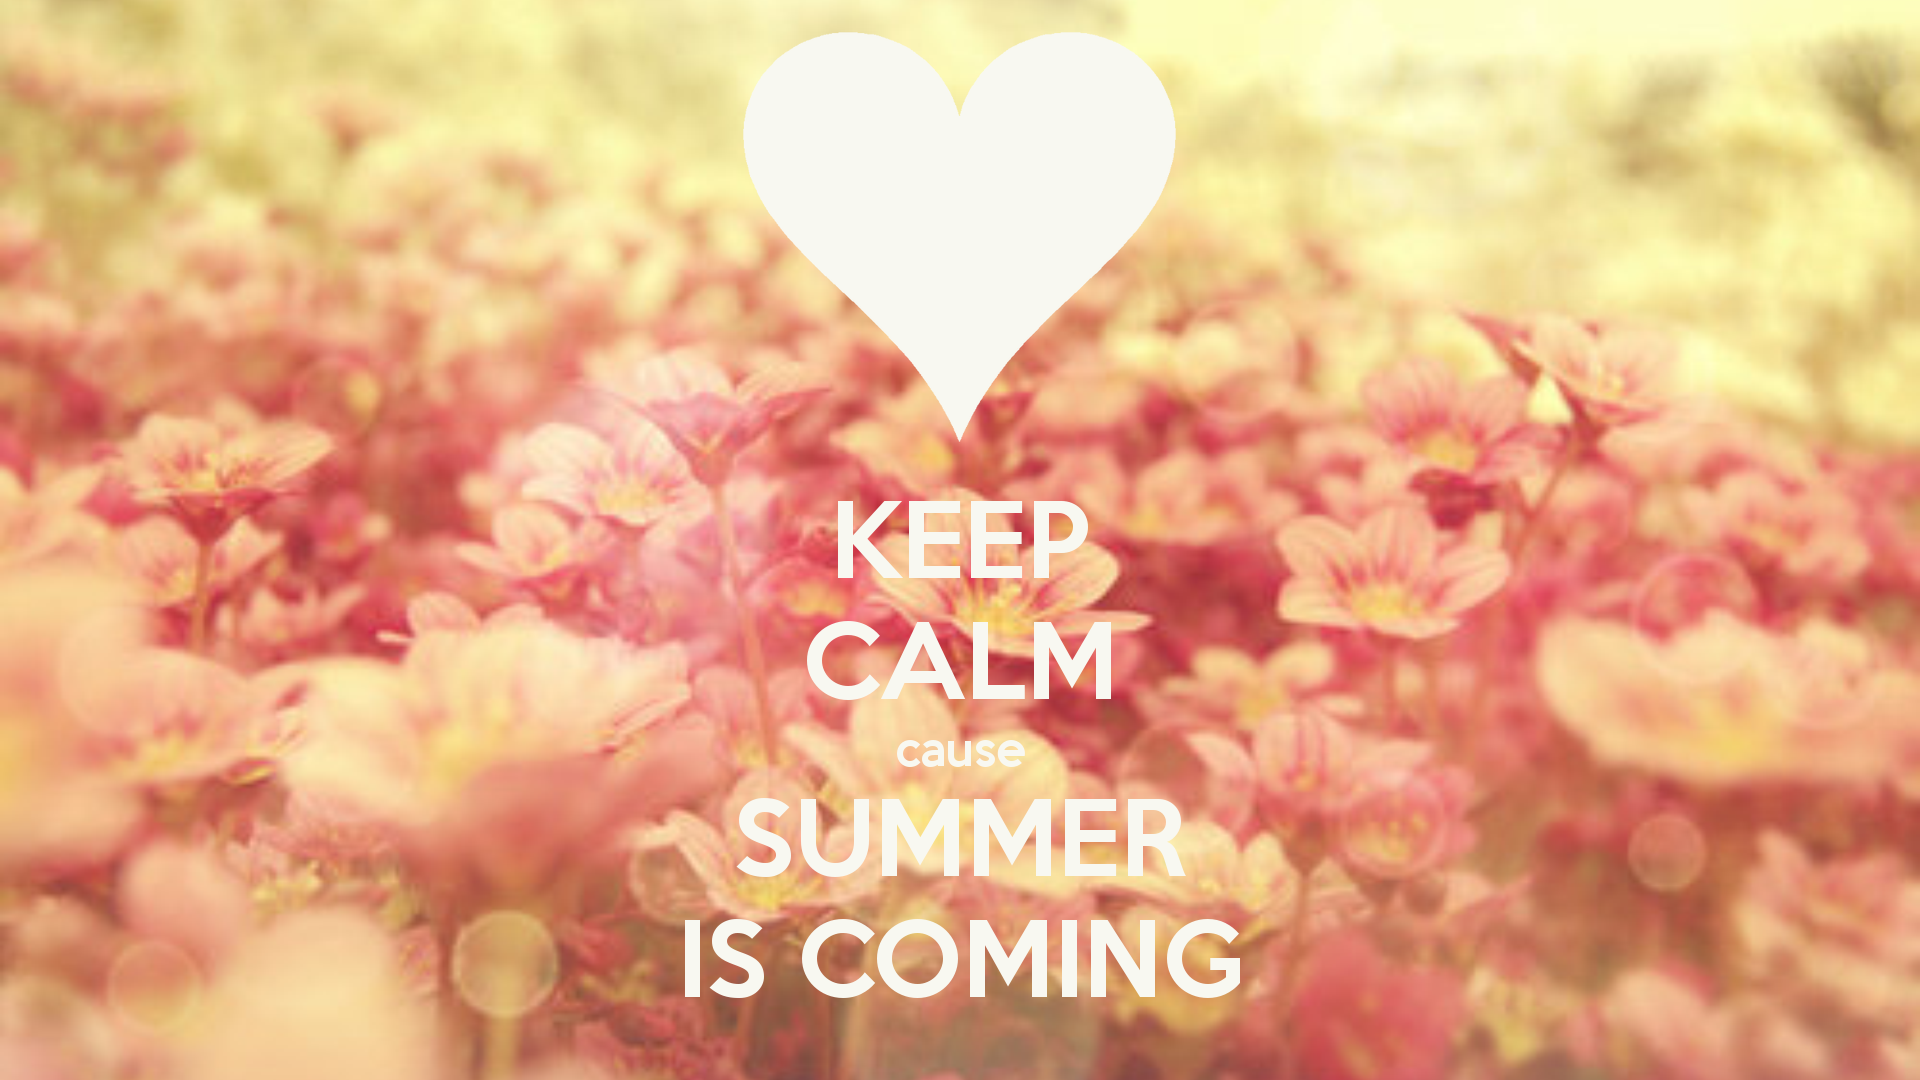 Keep calm, summer is coming summer summer quotes summer is coming. Summer quotes, Picture quotes, Summer is coming